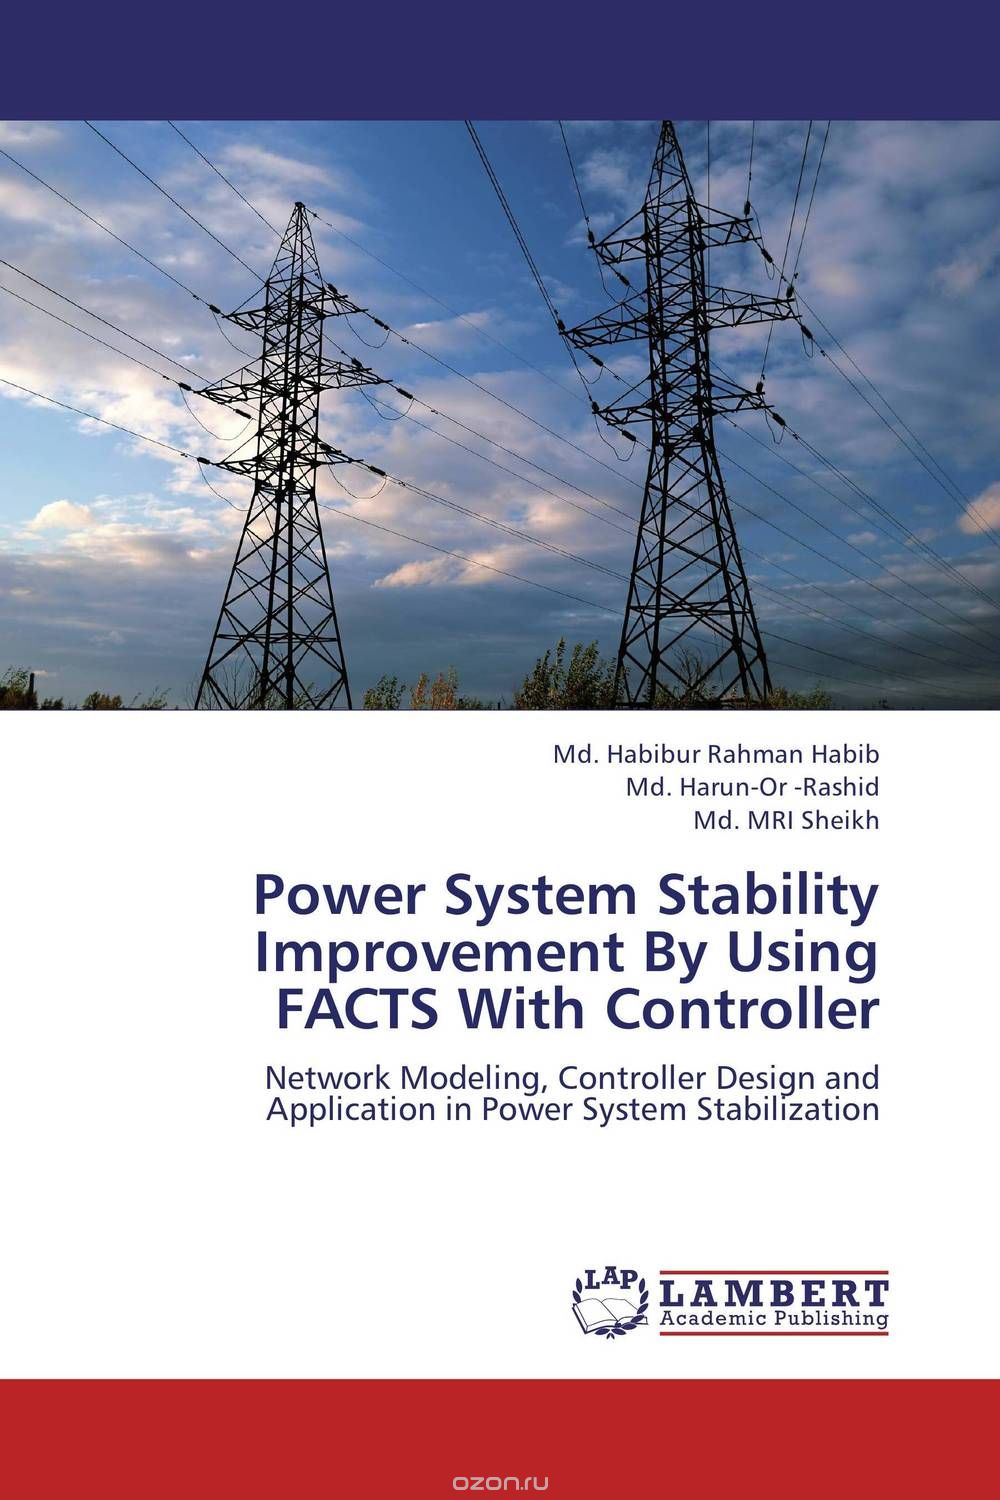 Скачать книгу "Power System Stability Improvement By Using FACTS With Controller"